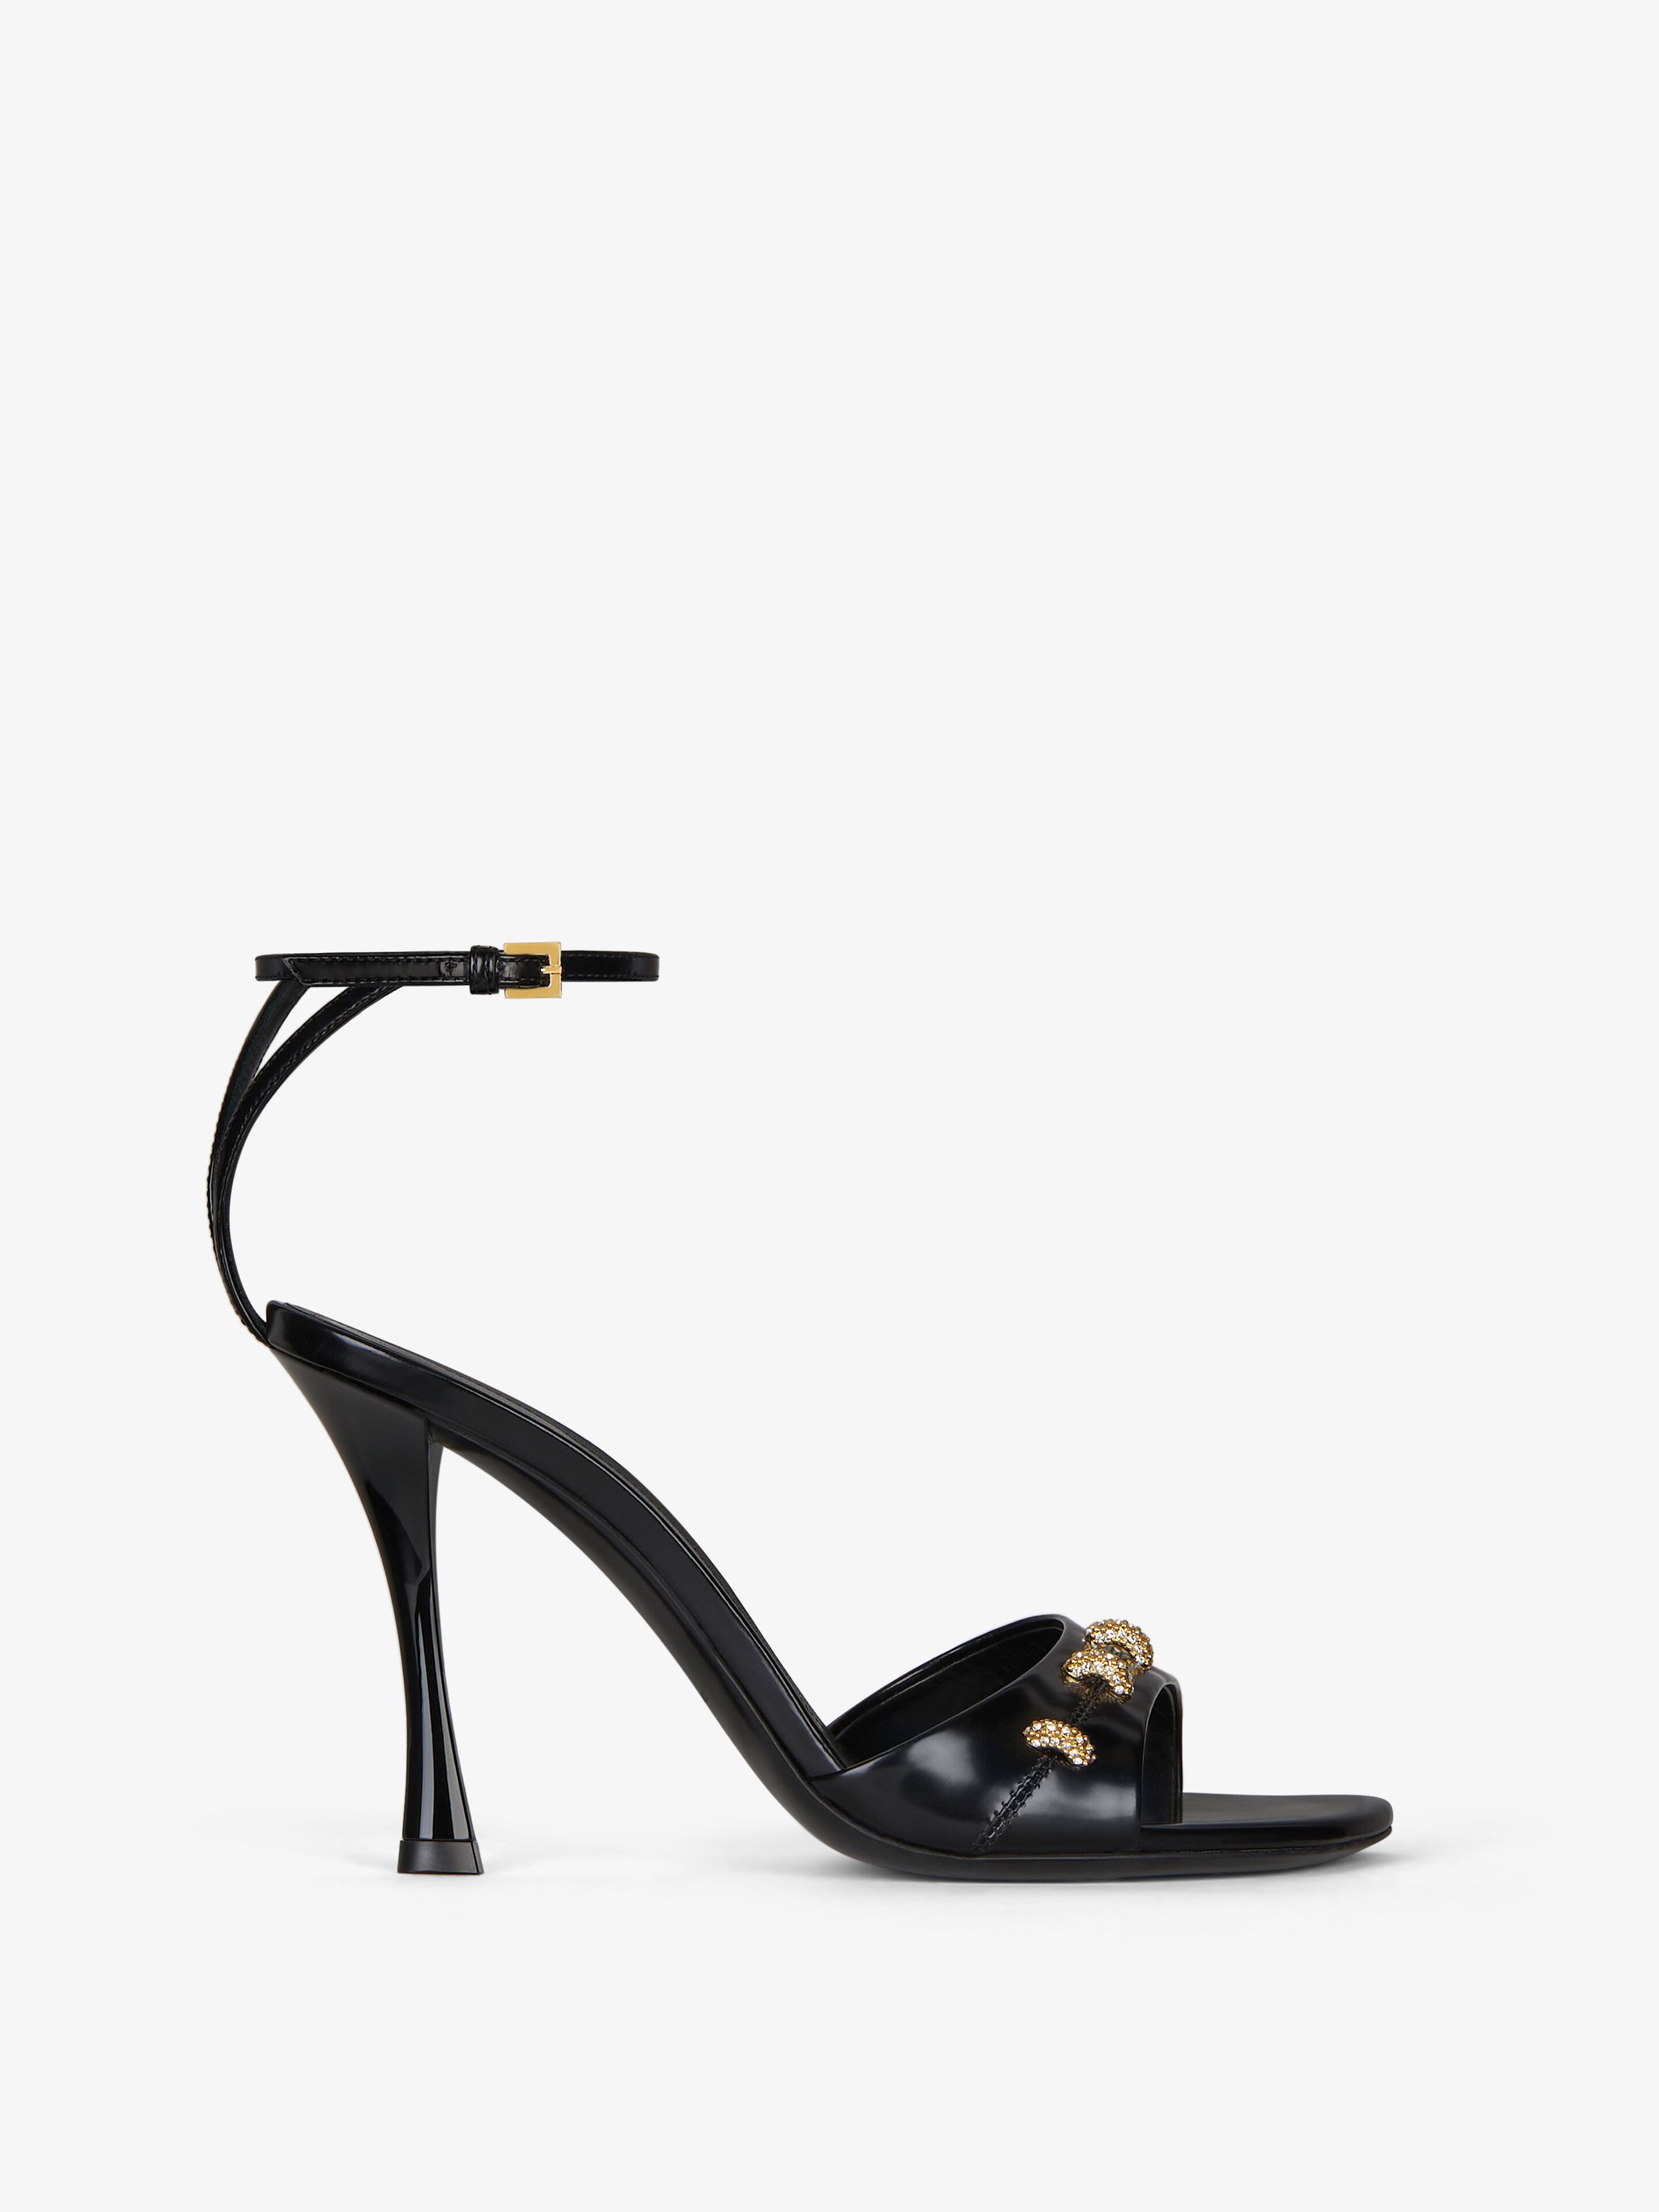 Shop Givenchy Stitch Sandals In Leather With Crystals Details In Black